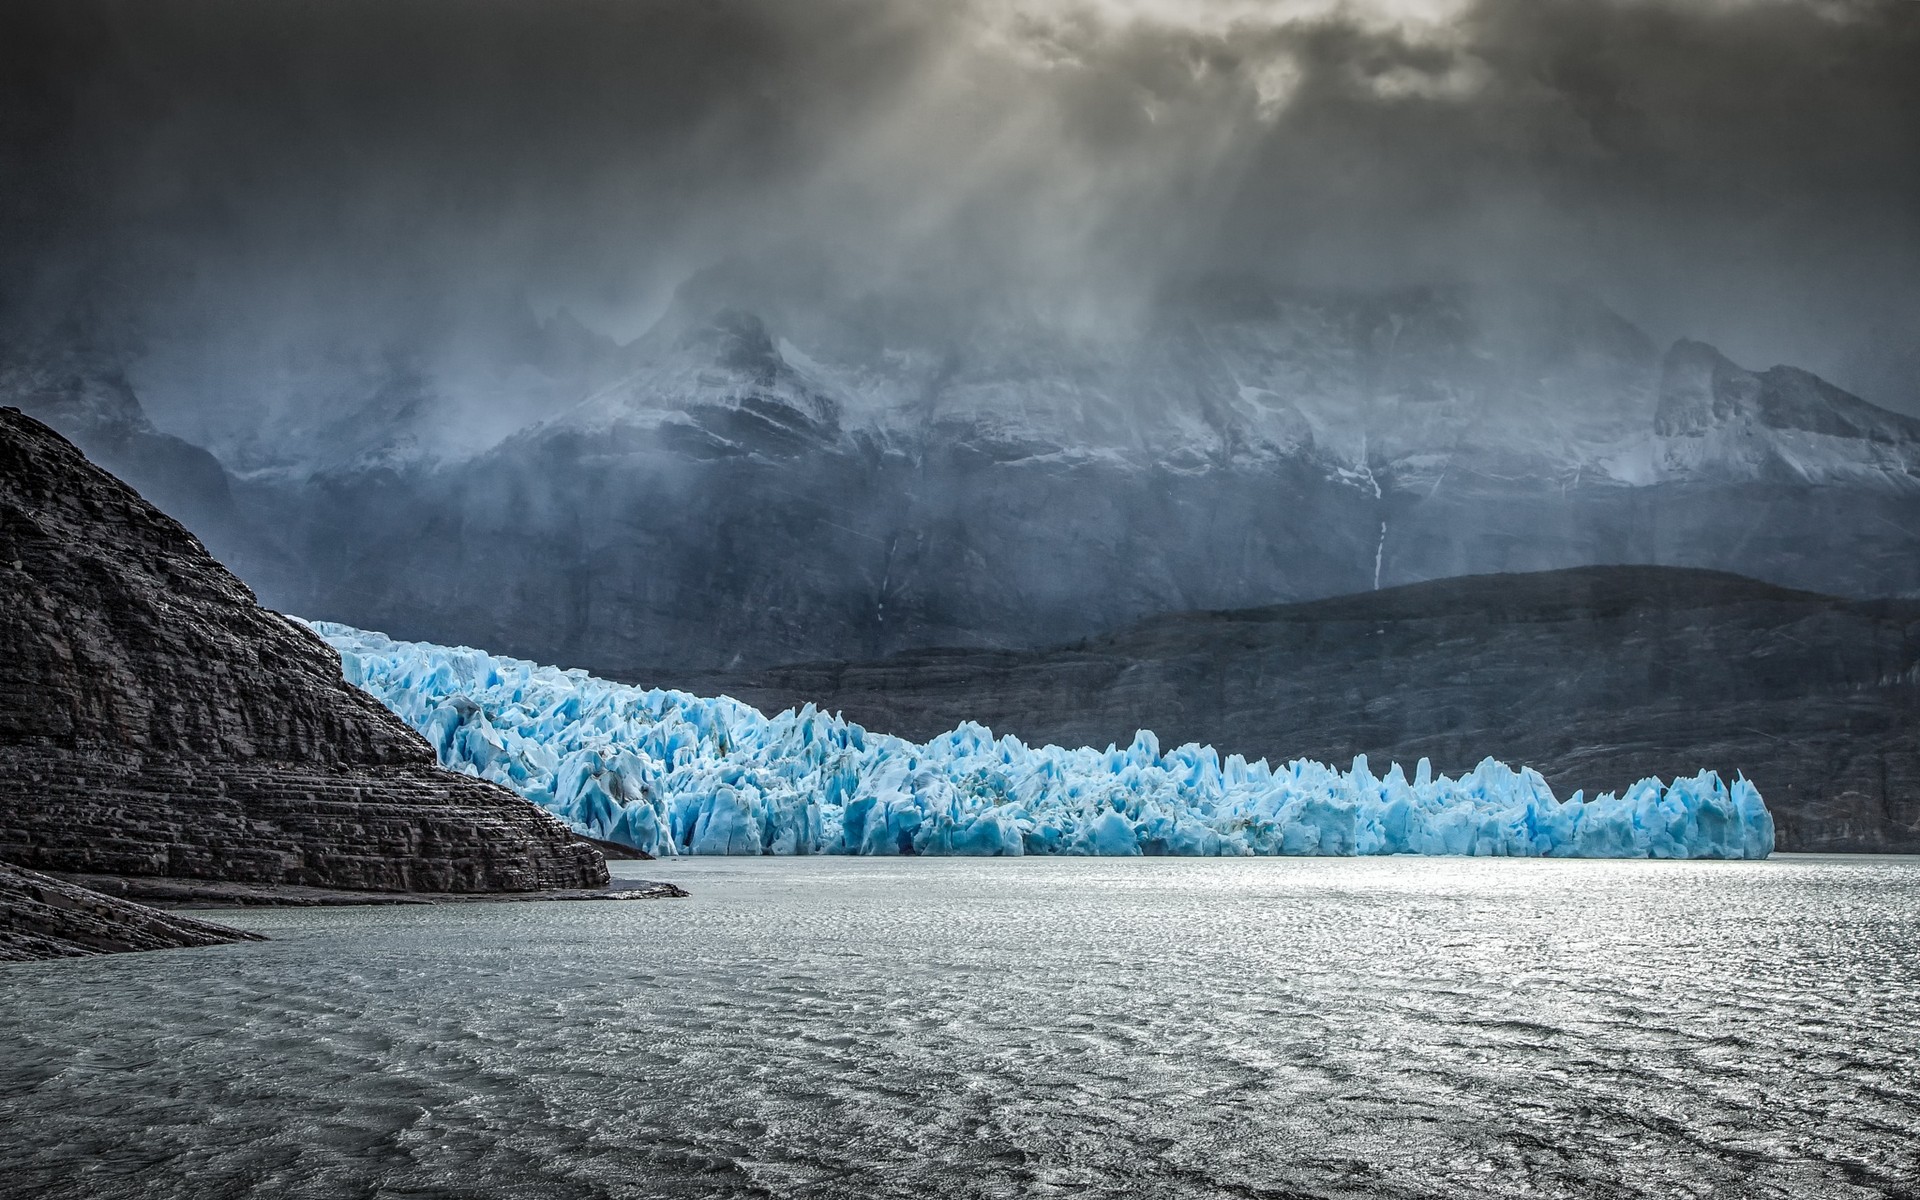 General 1920x1200 landscape nature glacier Chile Patagonia lake rocks erosion sun rays mountains mist ice dark clouds cyan gray South America cold outdoors